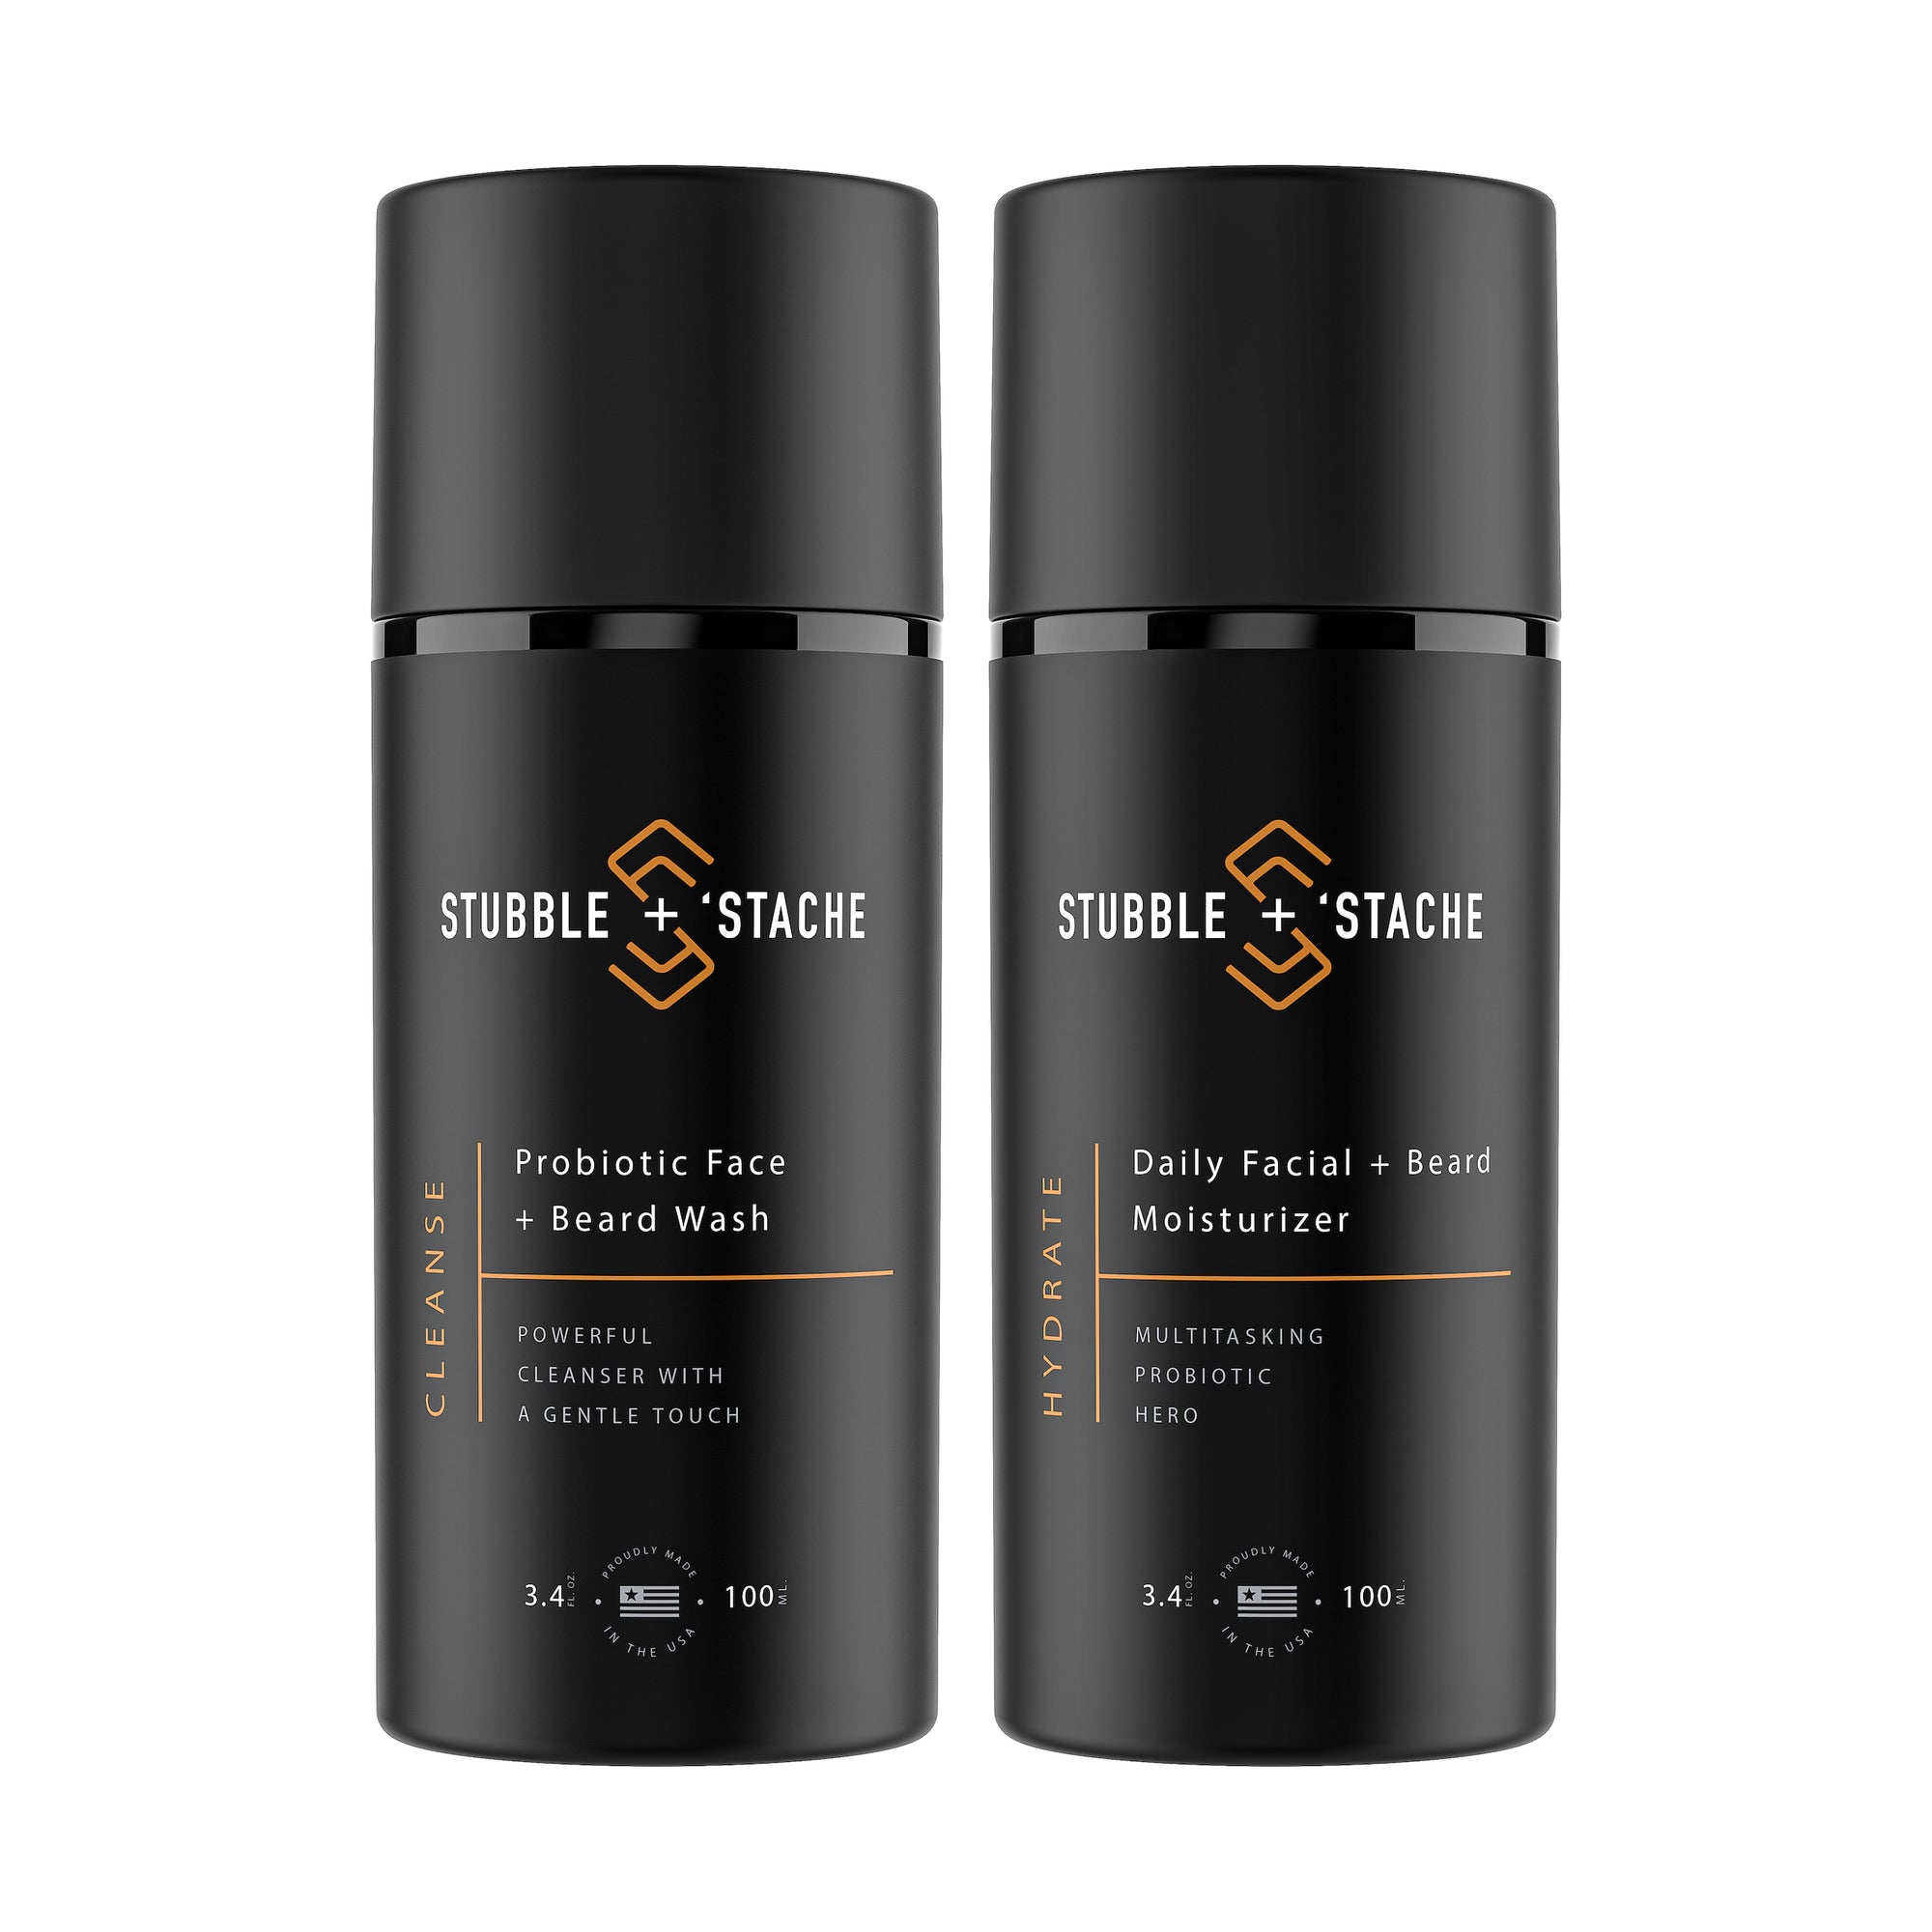 Beard Care Starter Kit. One 3.4 fl oz airless pump of Hydrate Daily Probiotic Facial + Beard Moisturizer and one 3.4 fl oz airless pump of Cleanse: Probiotic Face + Beard Wash by stubble + 'stache